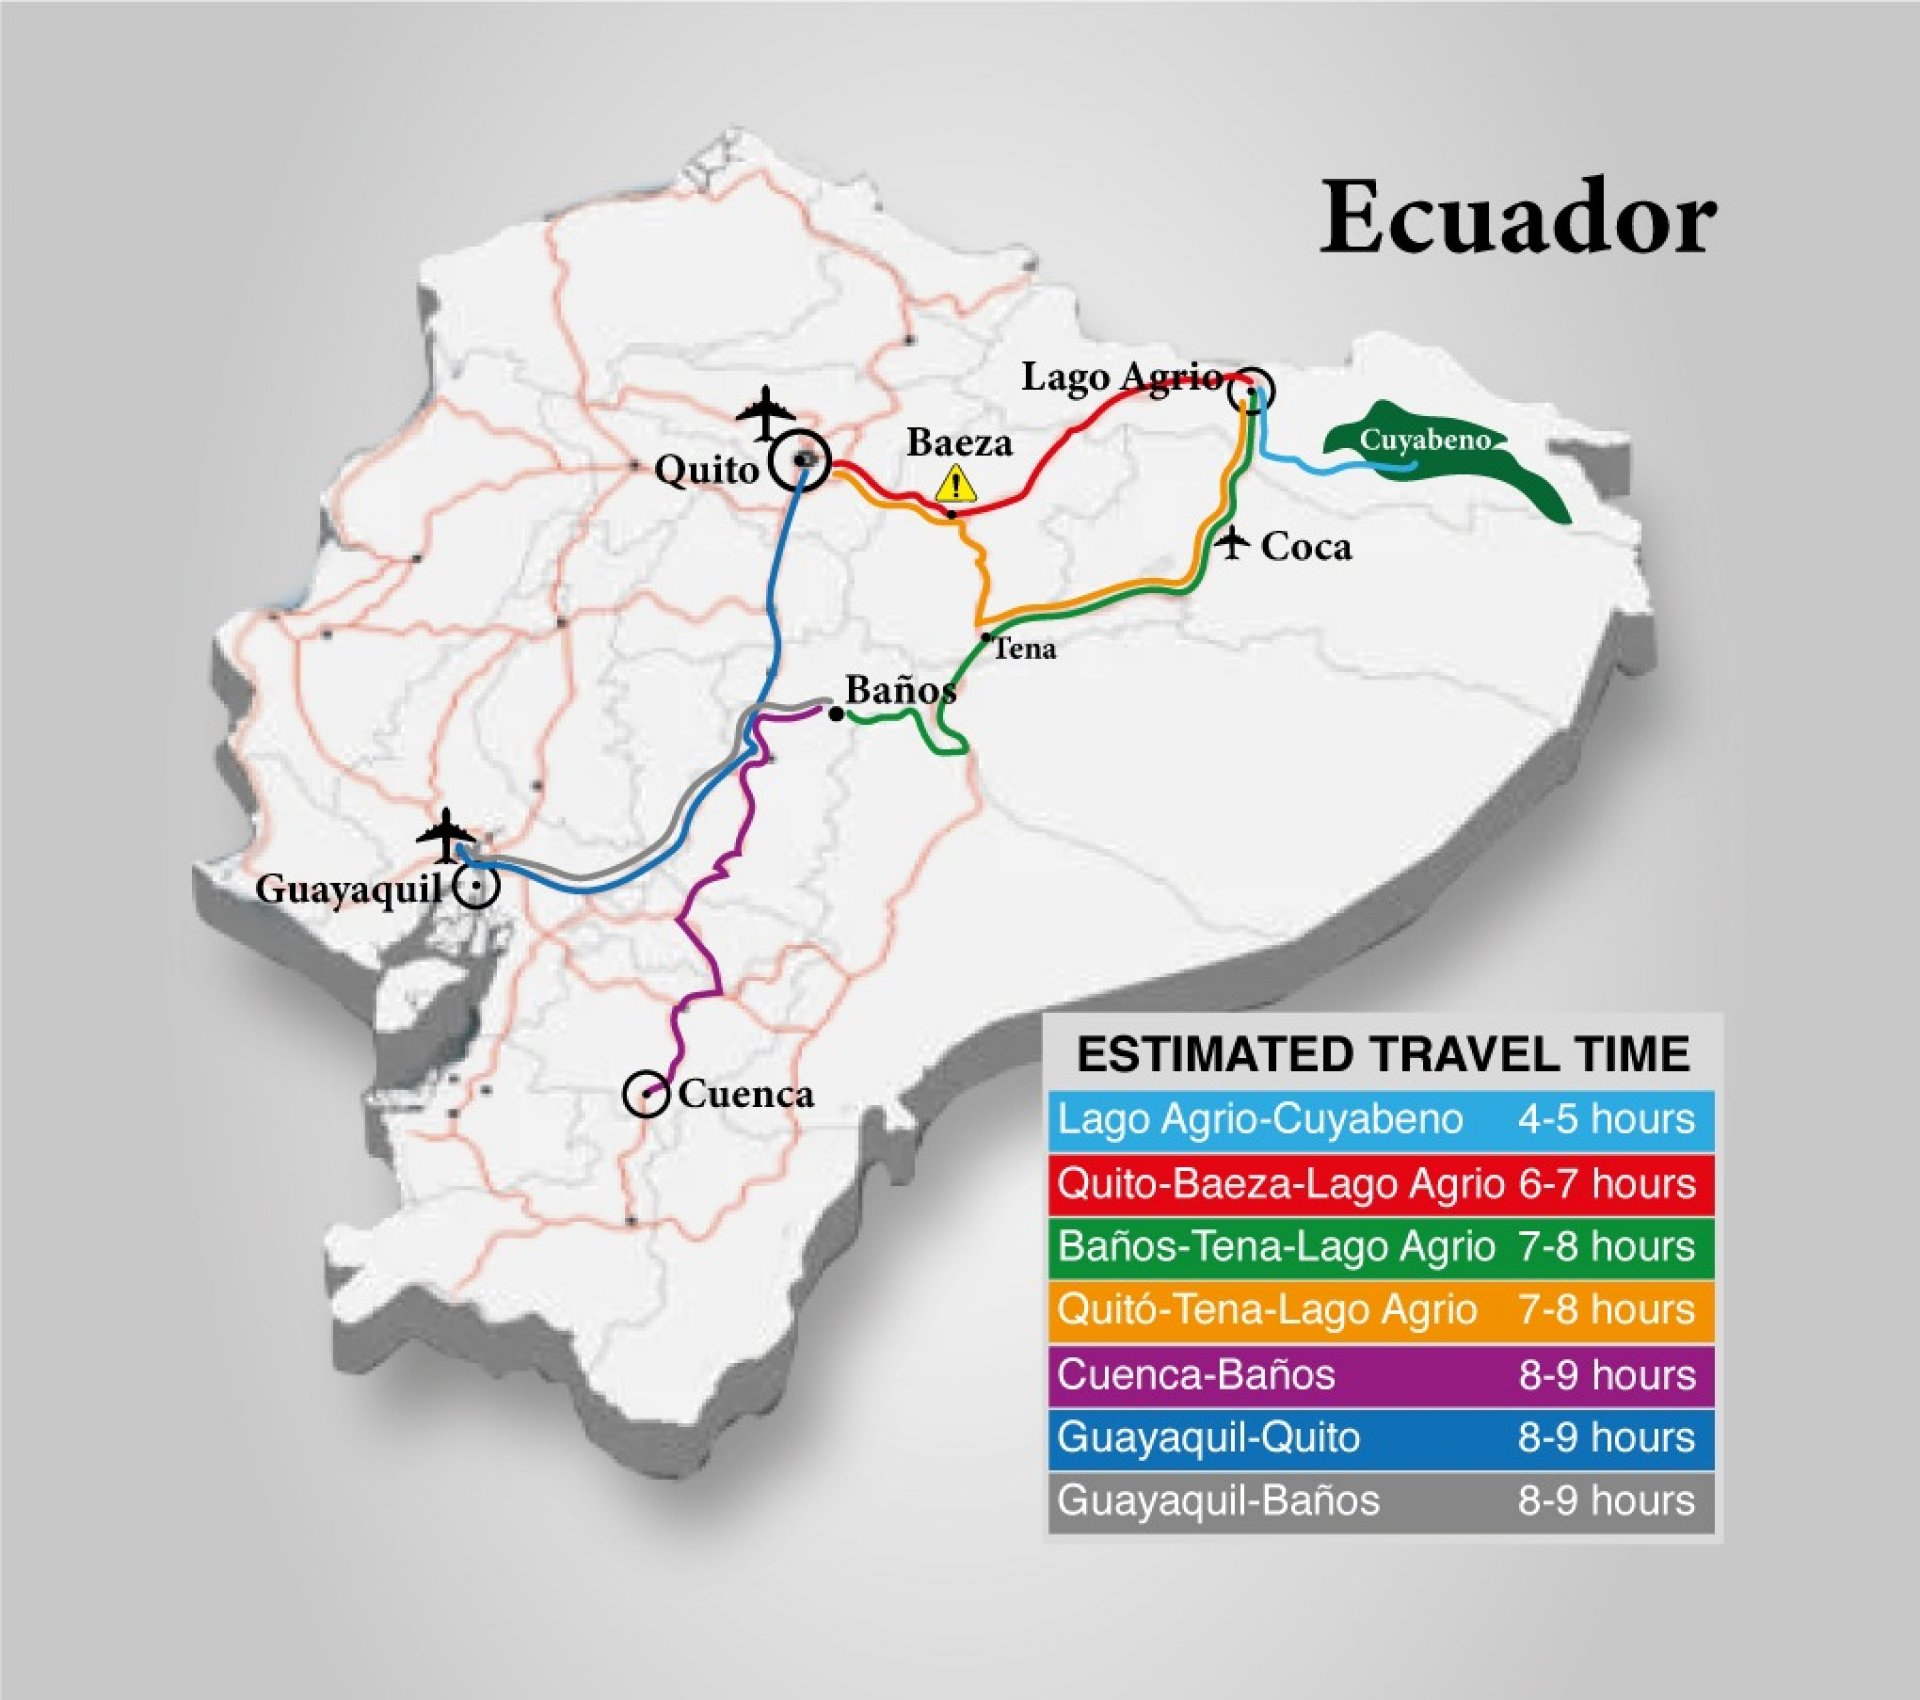 How to get to Lago Agrio (Cuyabeno) from Guayaquil?